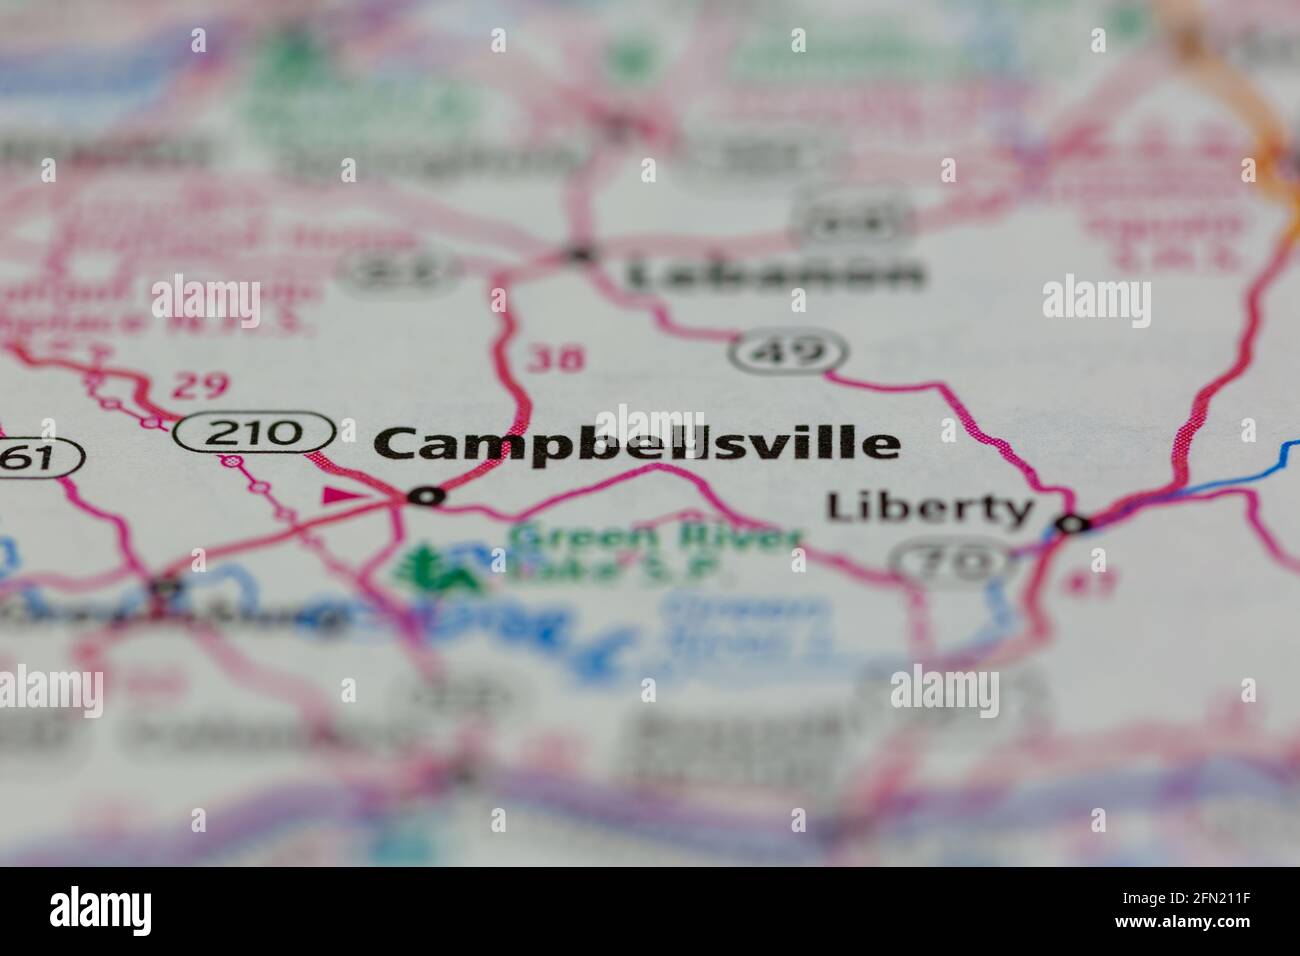 Campbellsville Kentucky Usa Shown On A Geography Map Or Road Map 2FN211F 